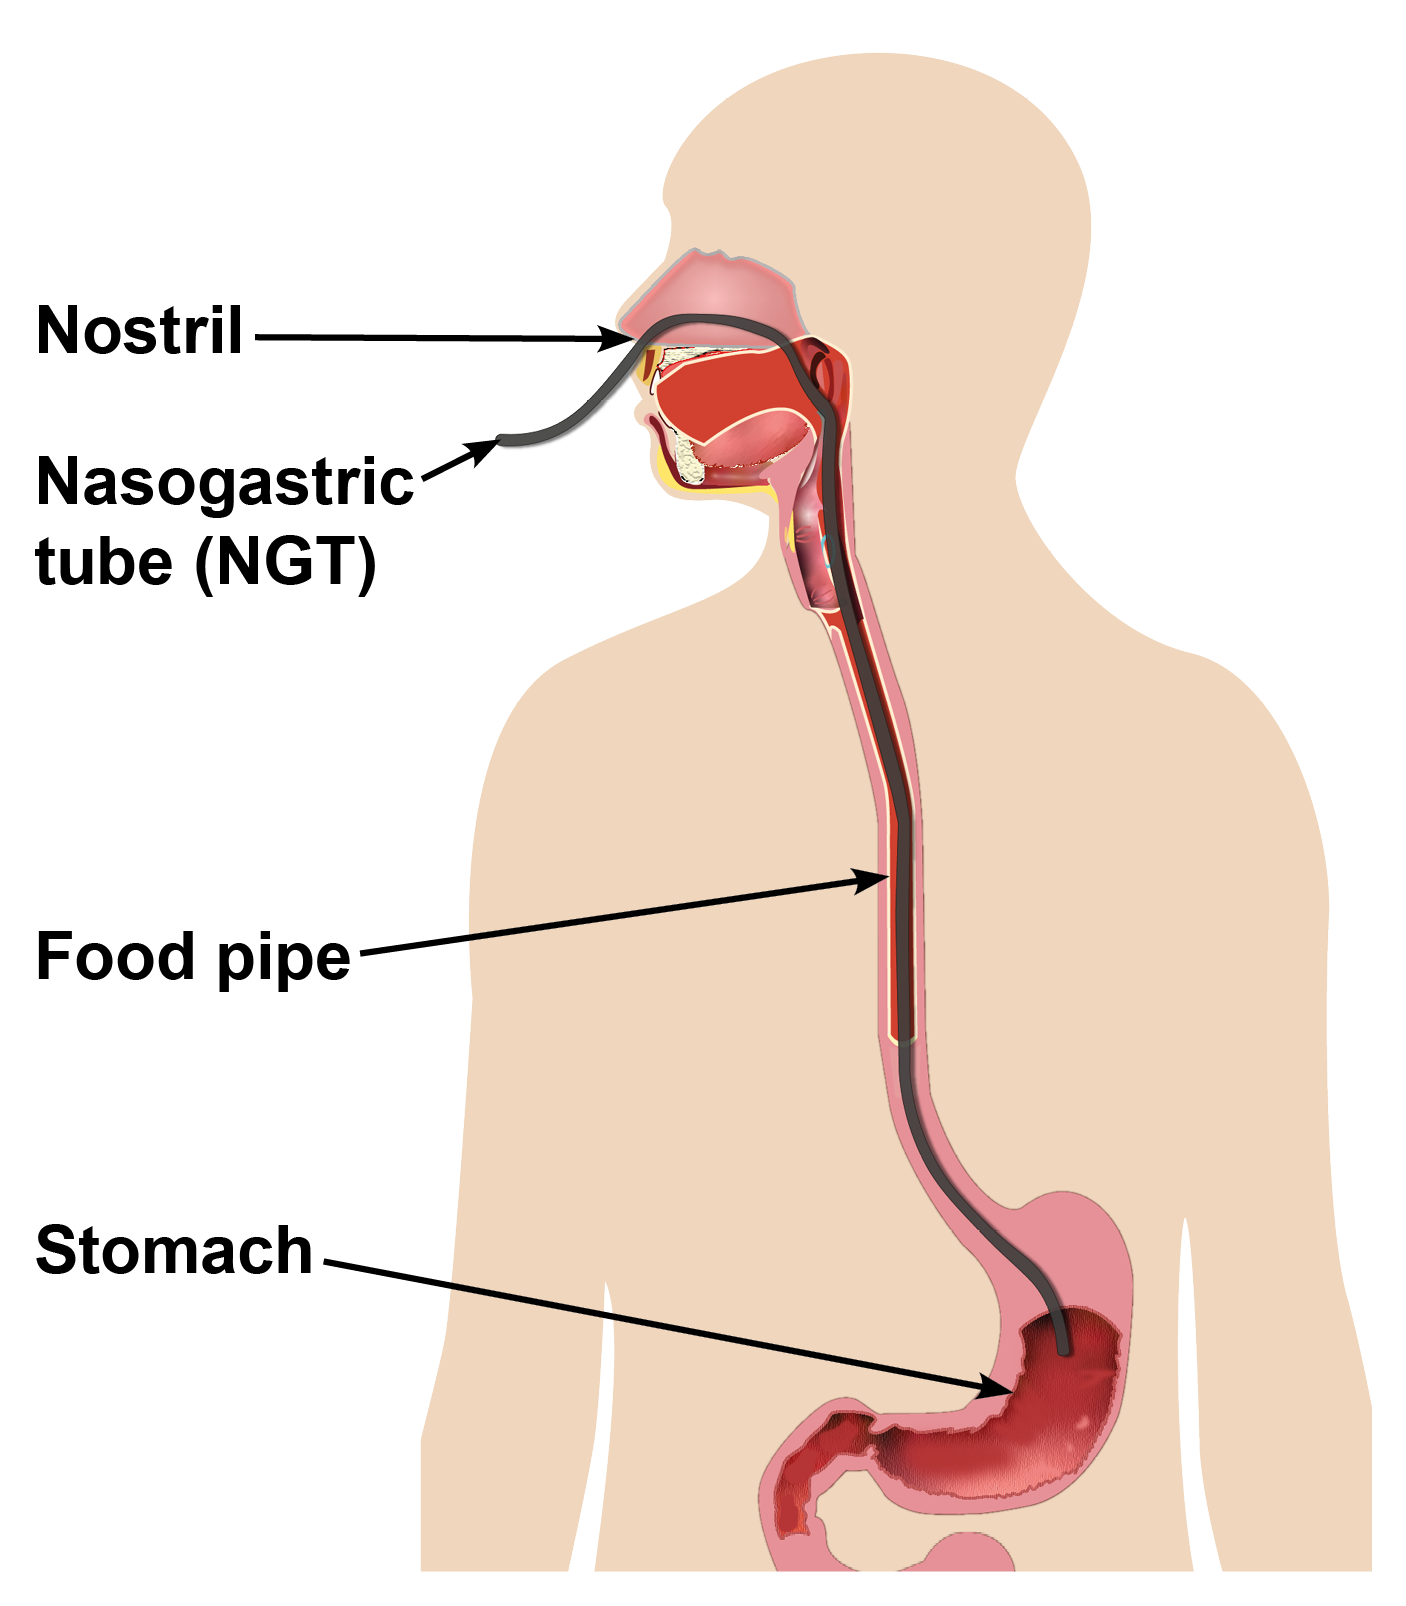 NG tube being inserted through the nostril and into the stomach, via the food pipe